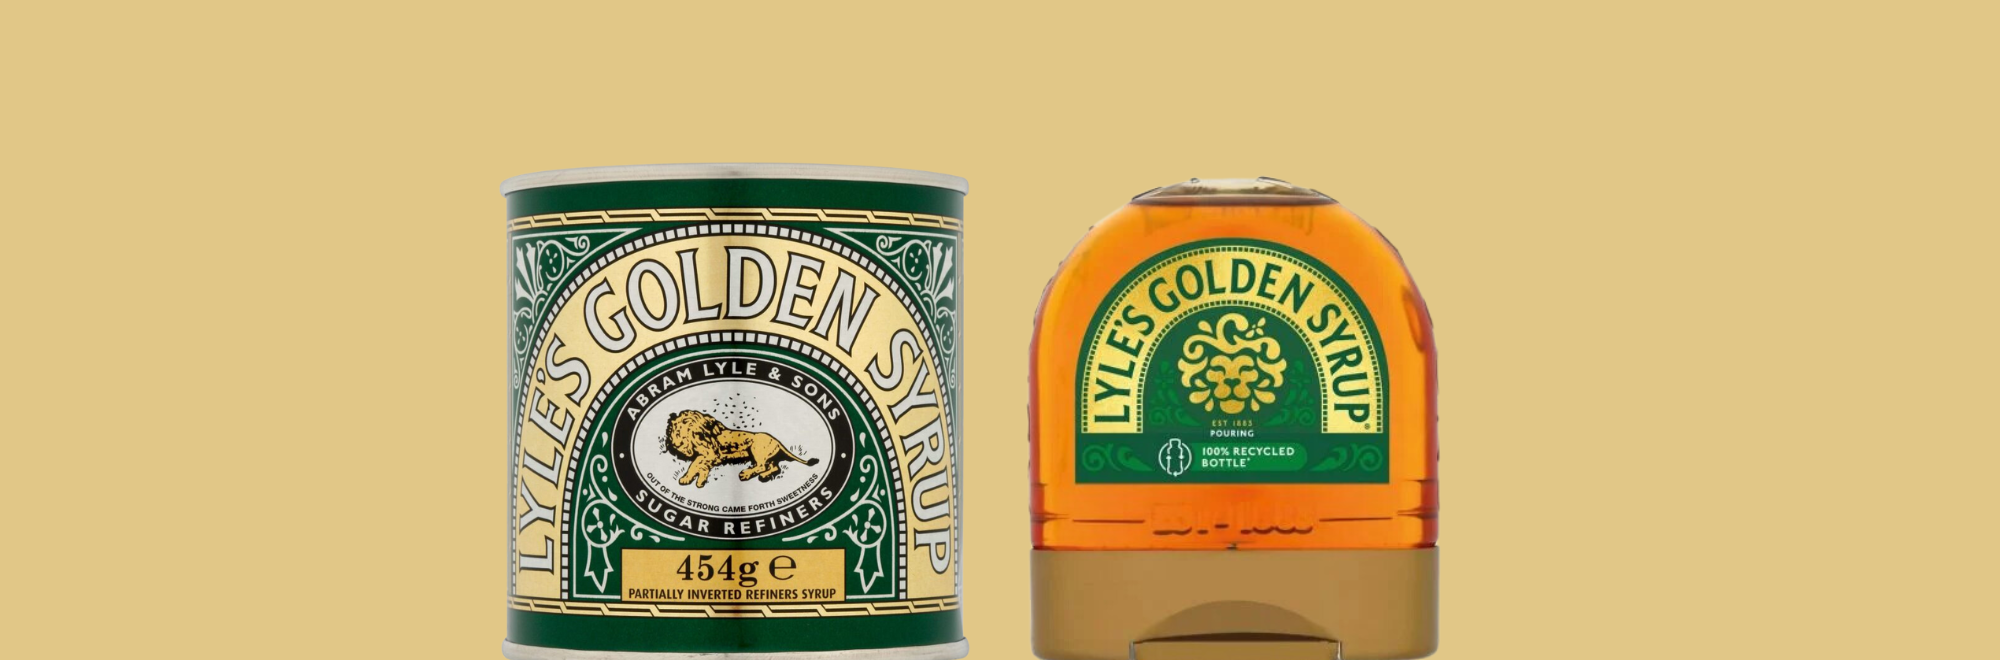 Golden Syrup’s rebrand: necessary or a step too far?